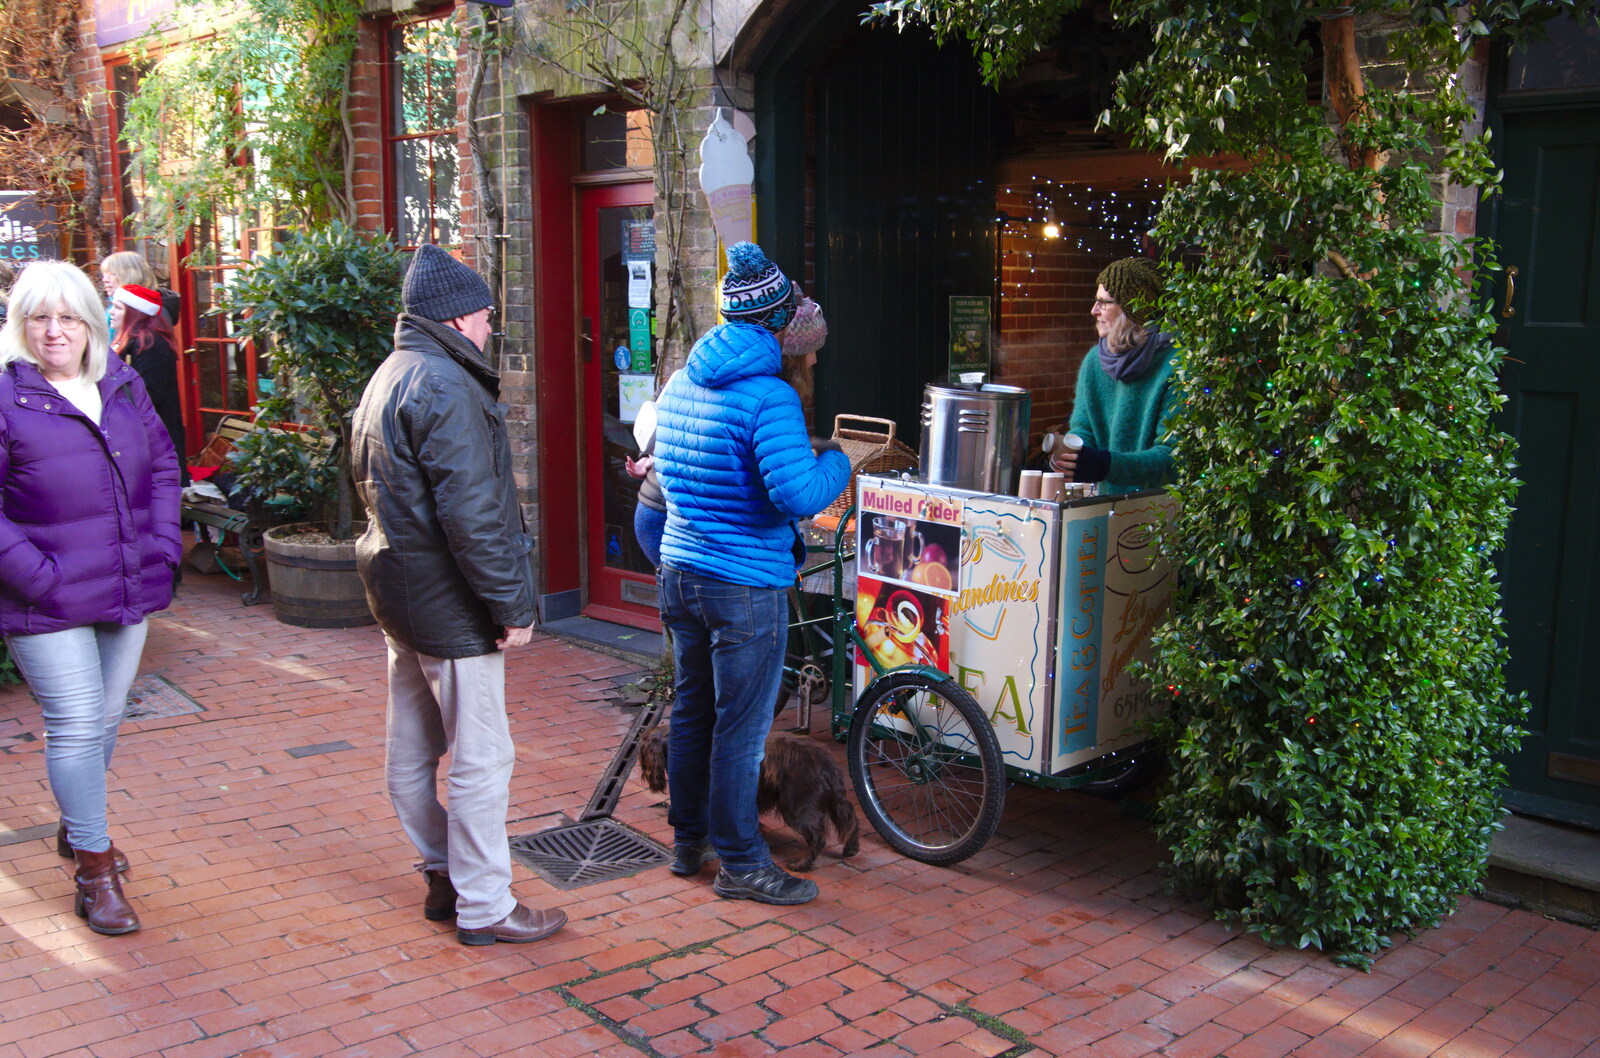 There's a queue at the mulled cider stall from The St. Nicholas Street Winter Fayre, Diss, Norfolk - 14th December 2019